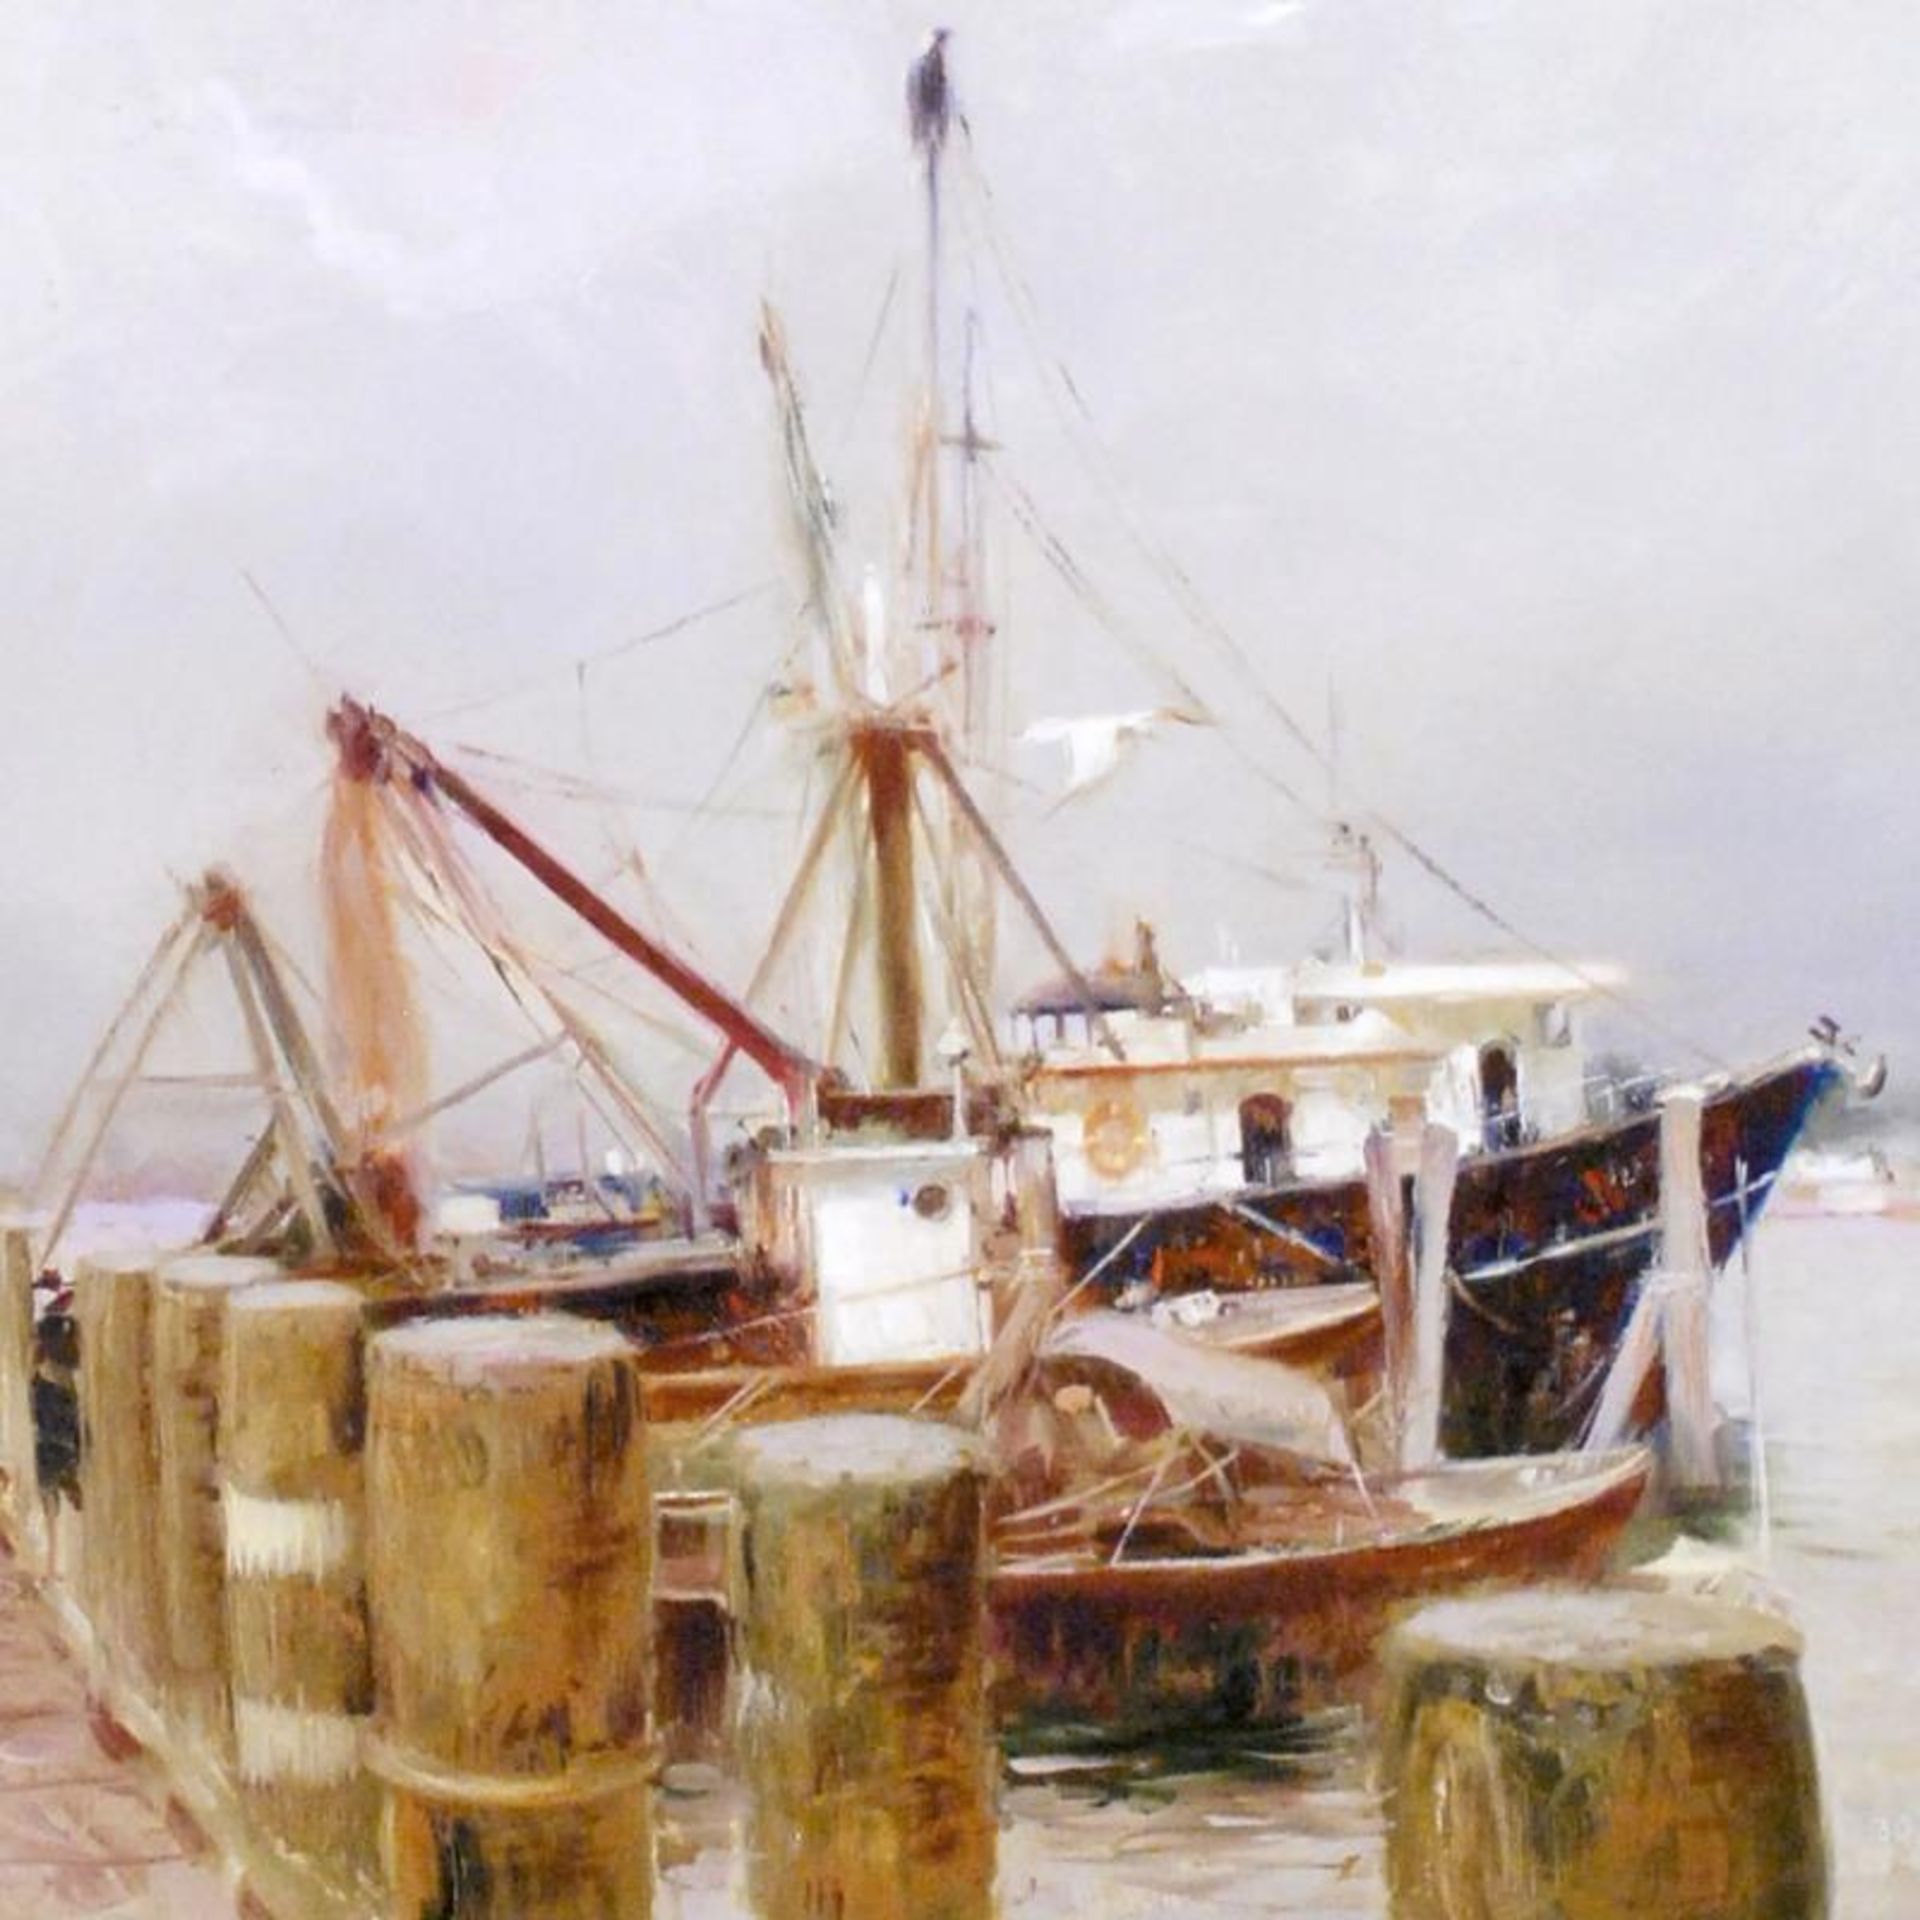 Pino (1939-2010) "Safe Harbor" Limited Edition Giclee. Numbered and Hand Signed; - Image 2 of 2